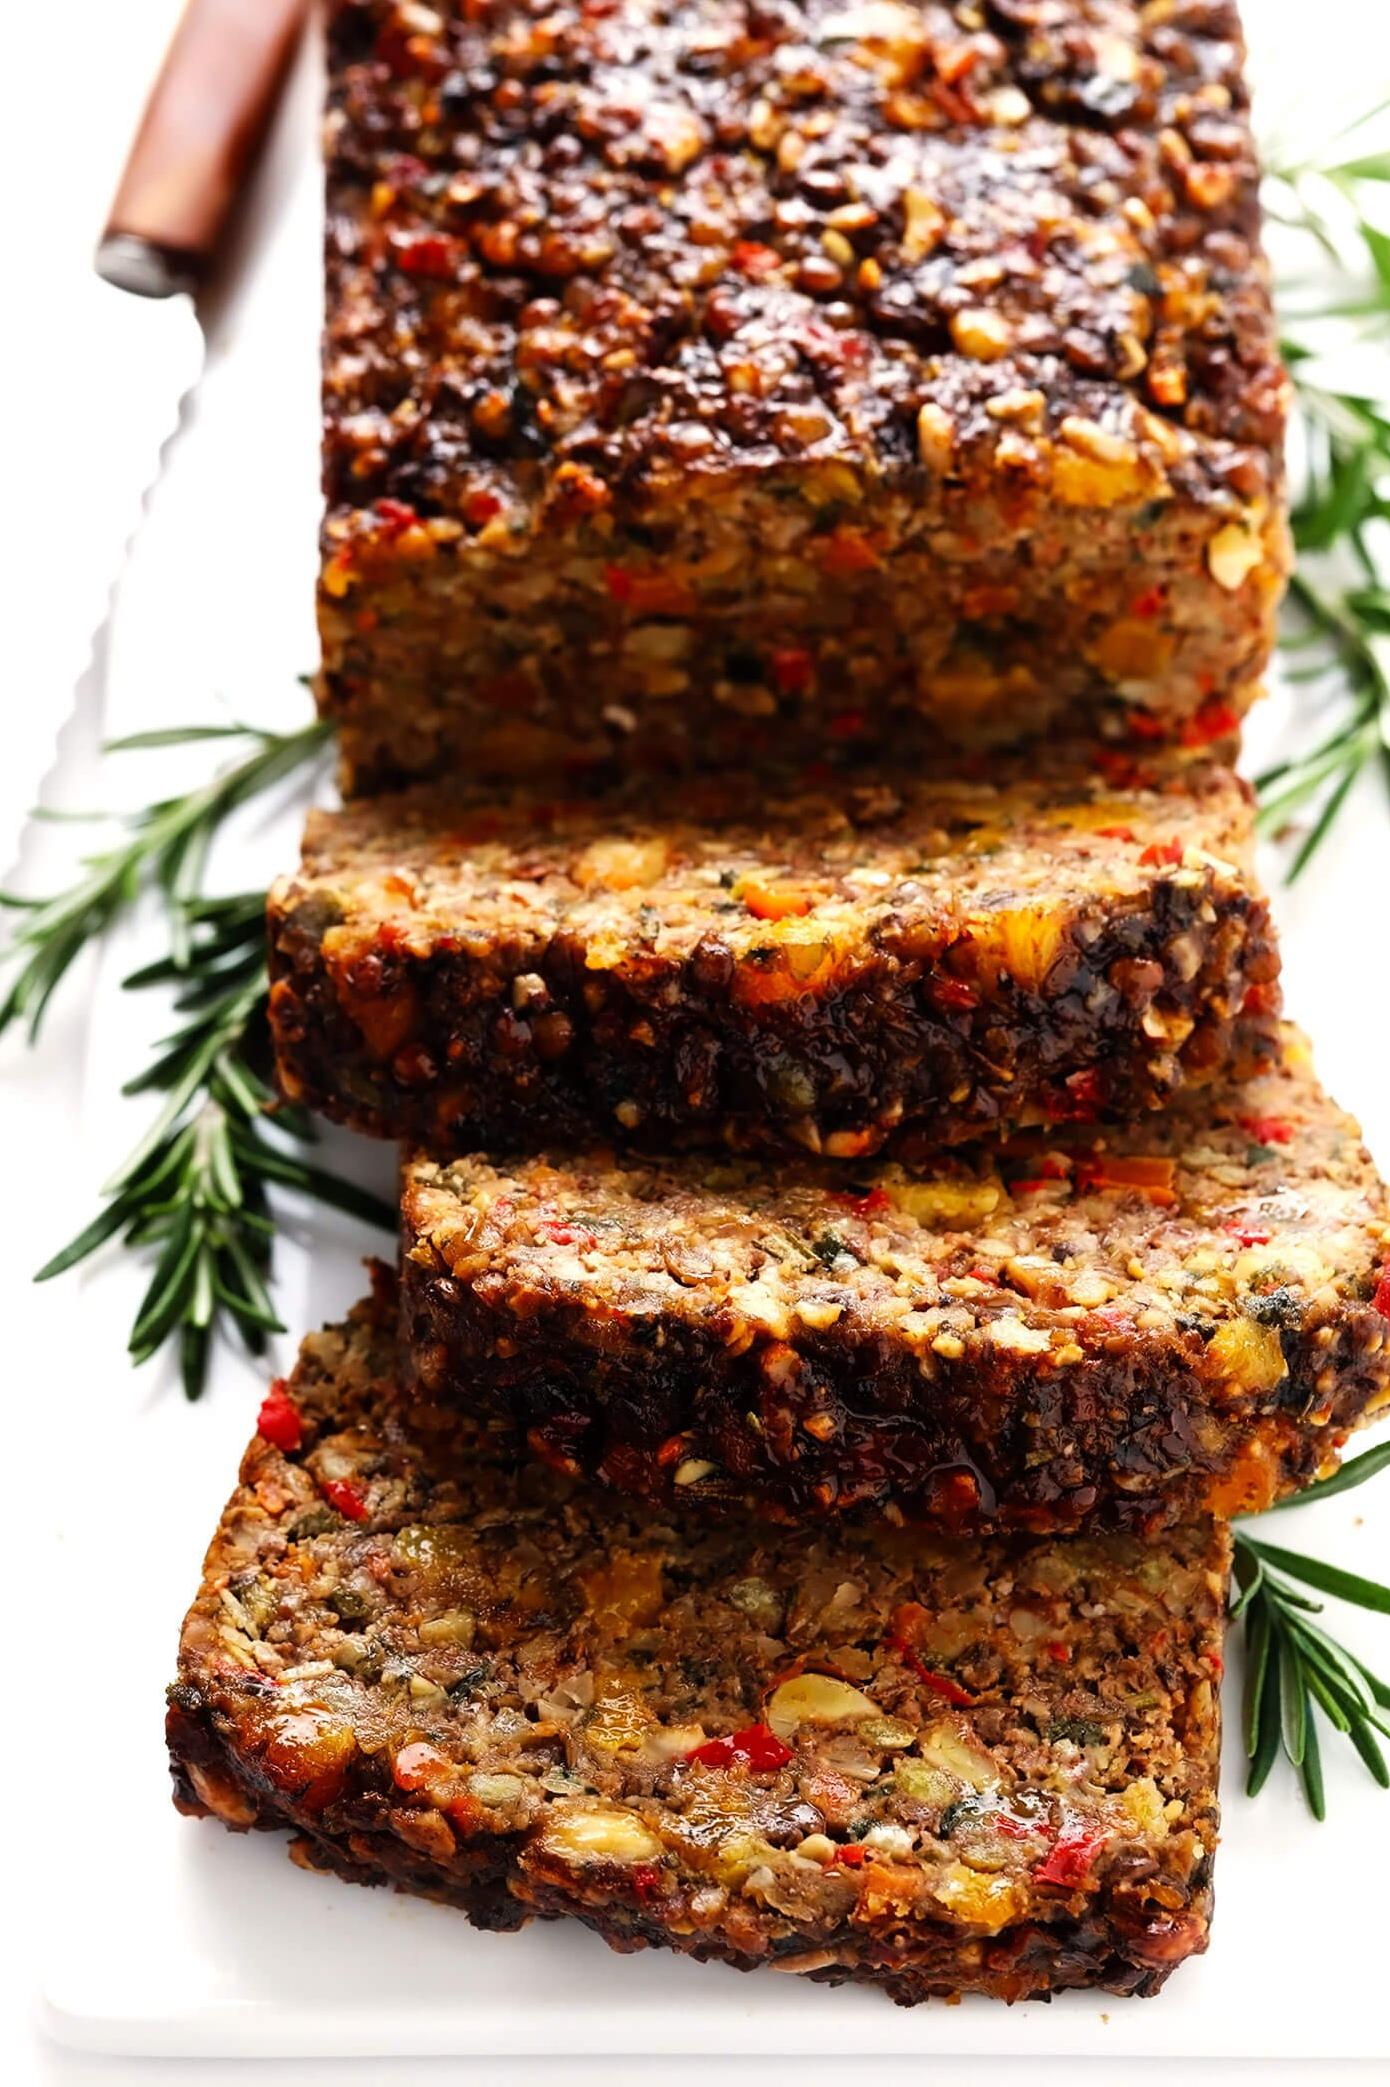  Satisfy your taste buds with this delicious Vegetarian Nut Loaf!